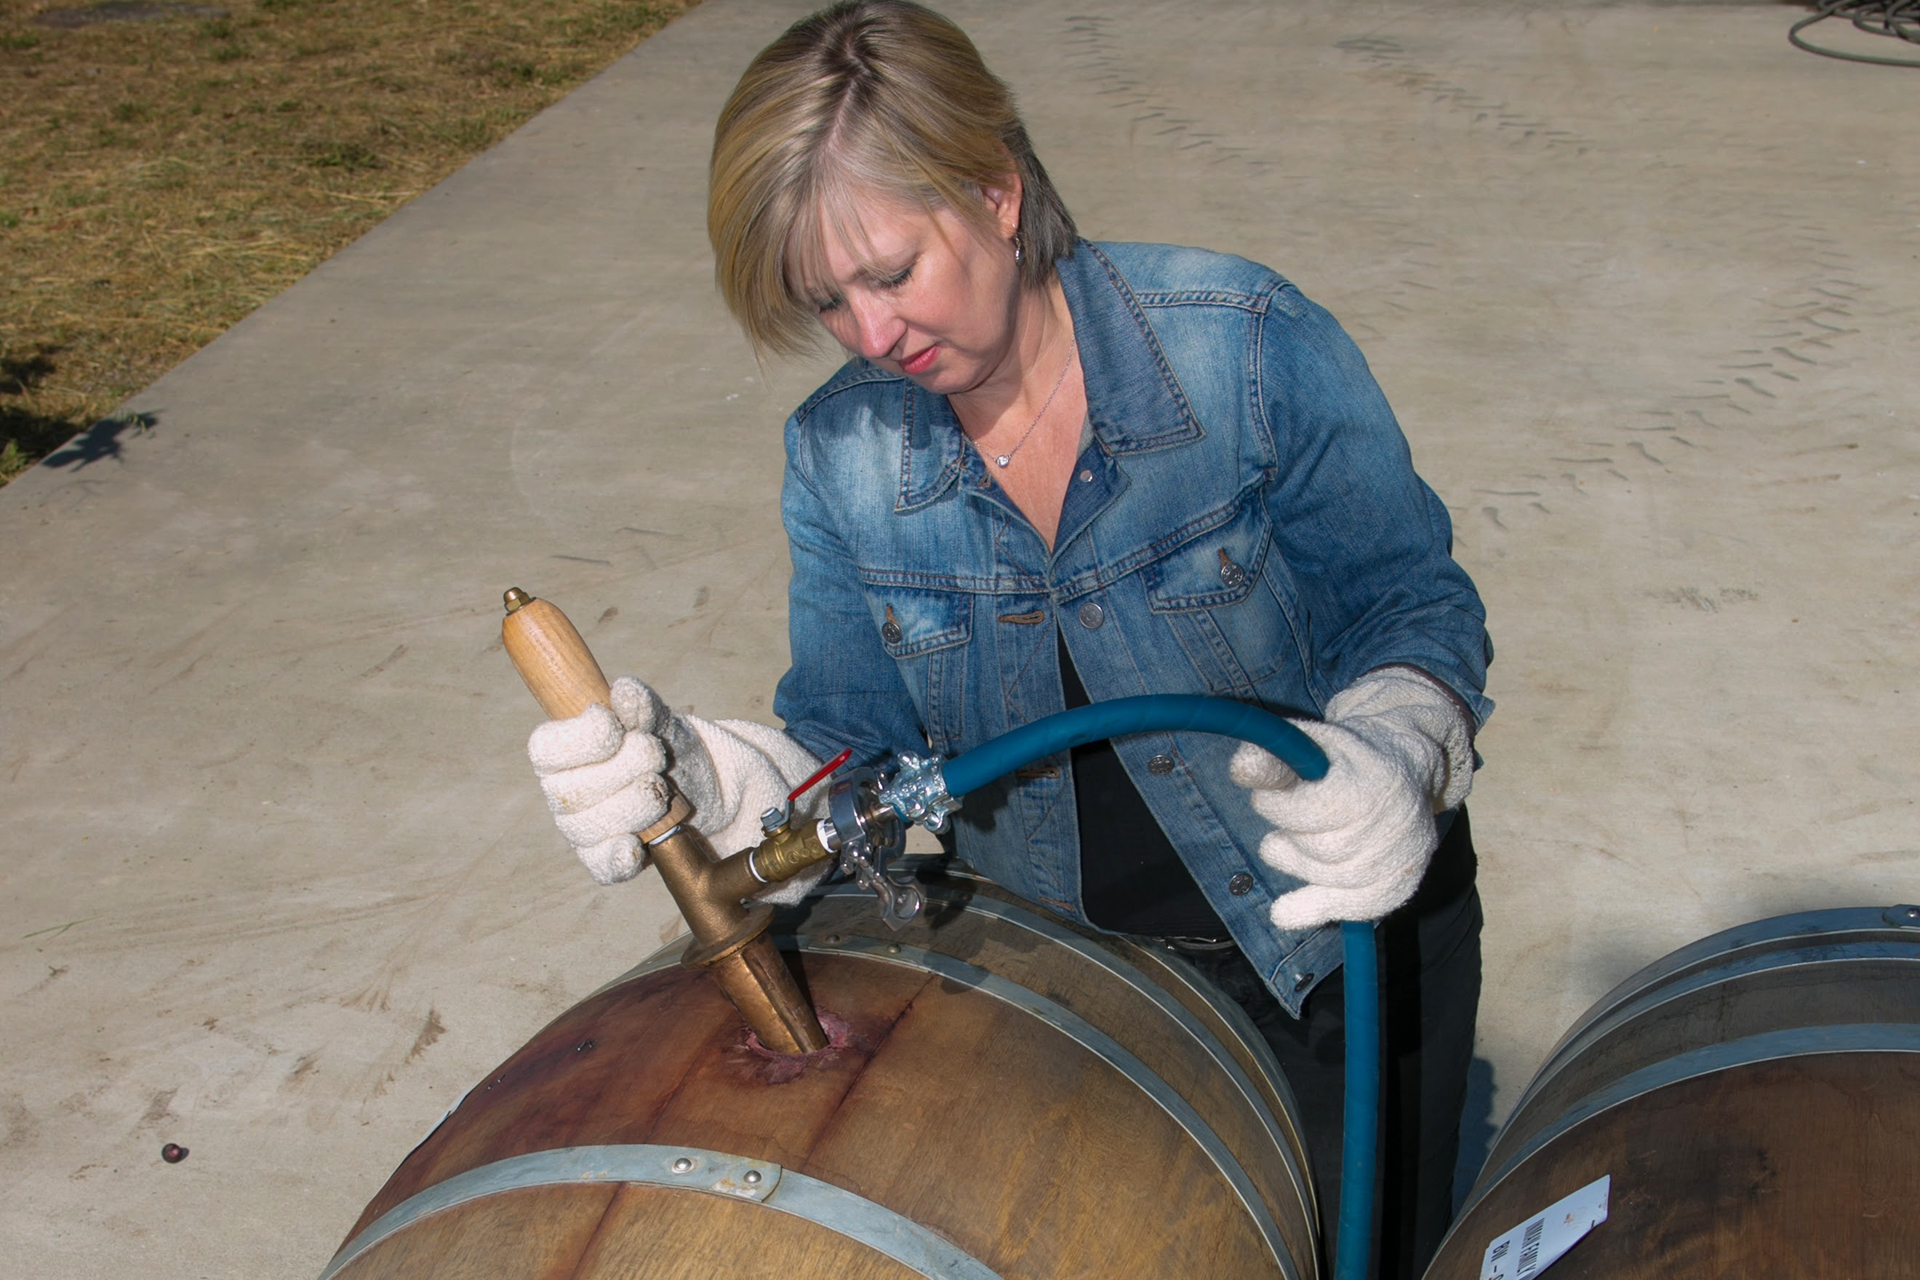 Owner and winemaker Kathleen Inman taking a sample of wine from a barrel